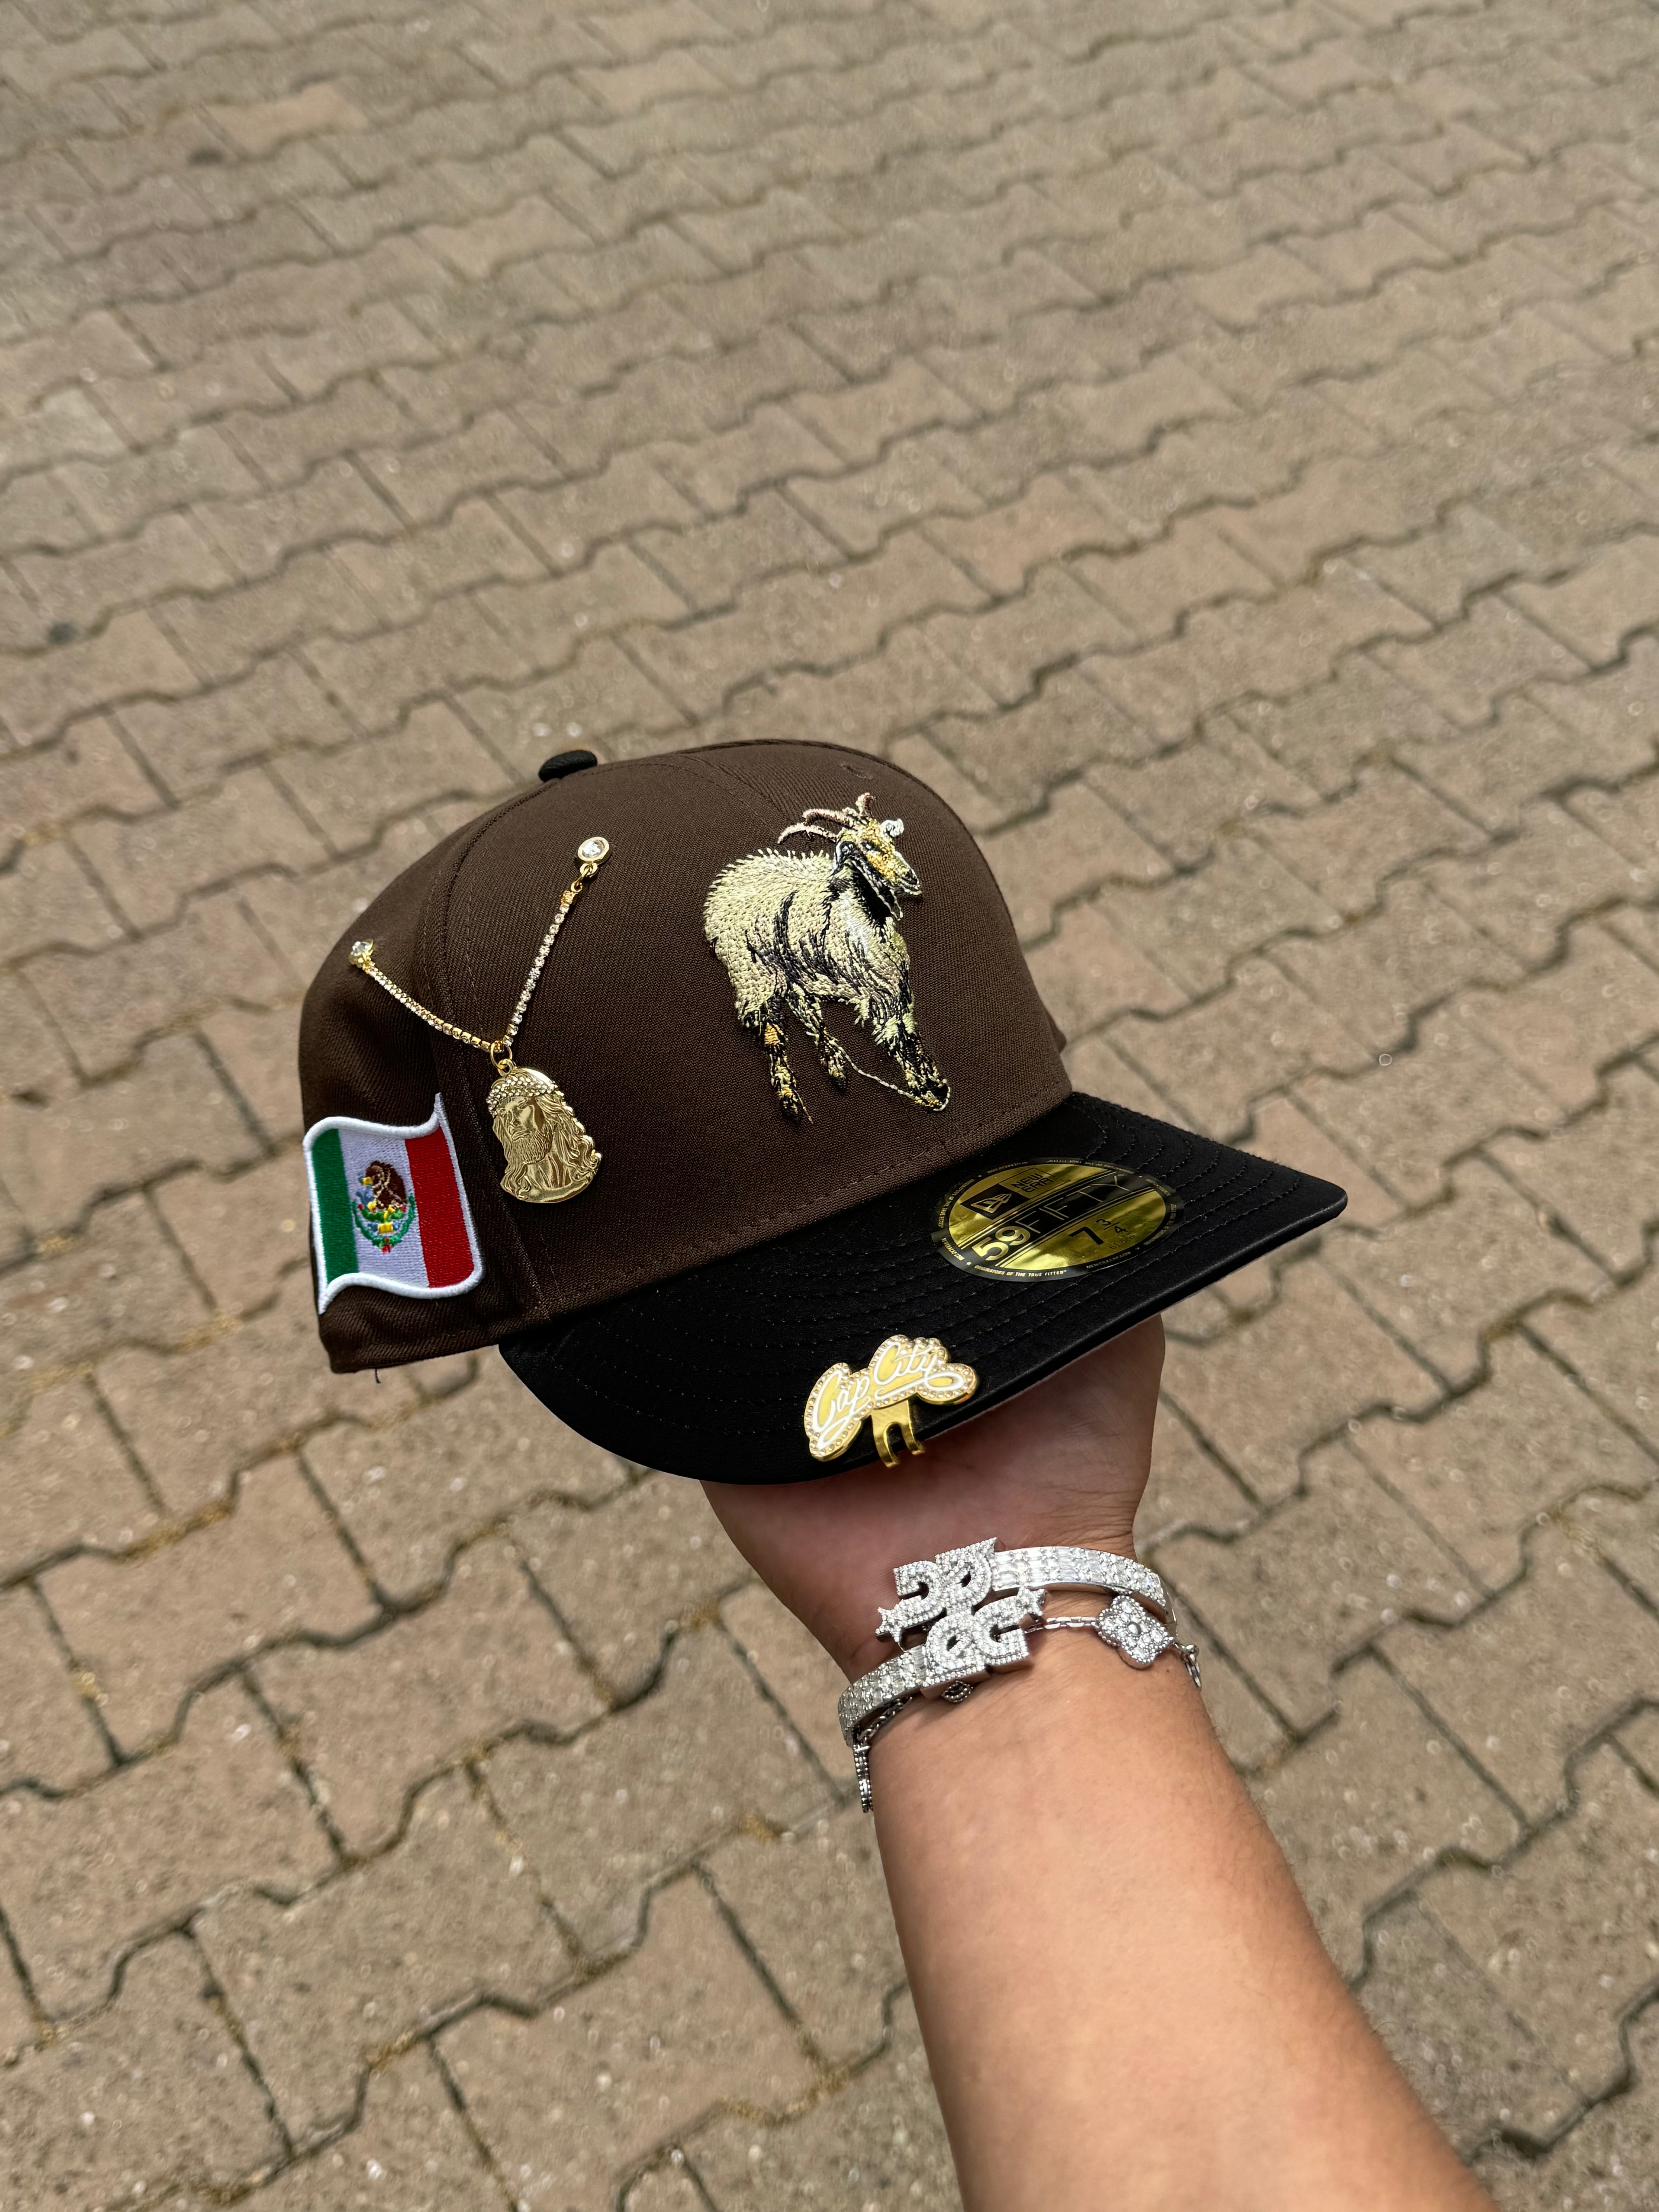 NEW ERA EXCLUSIVE 59FIFTY BROWN/SATIN MEXICO "THE GOAT" W/ MEXICO FLAG PATCH